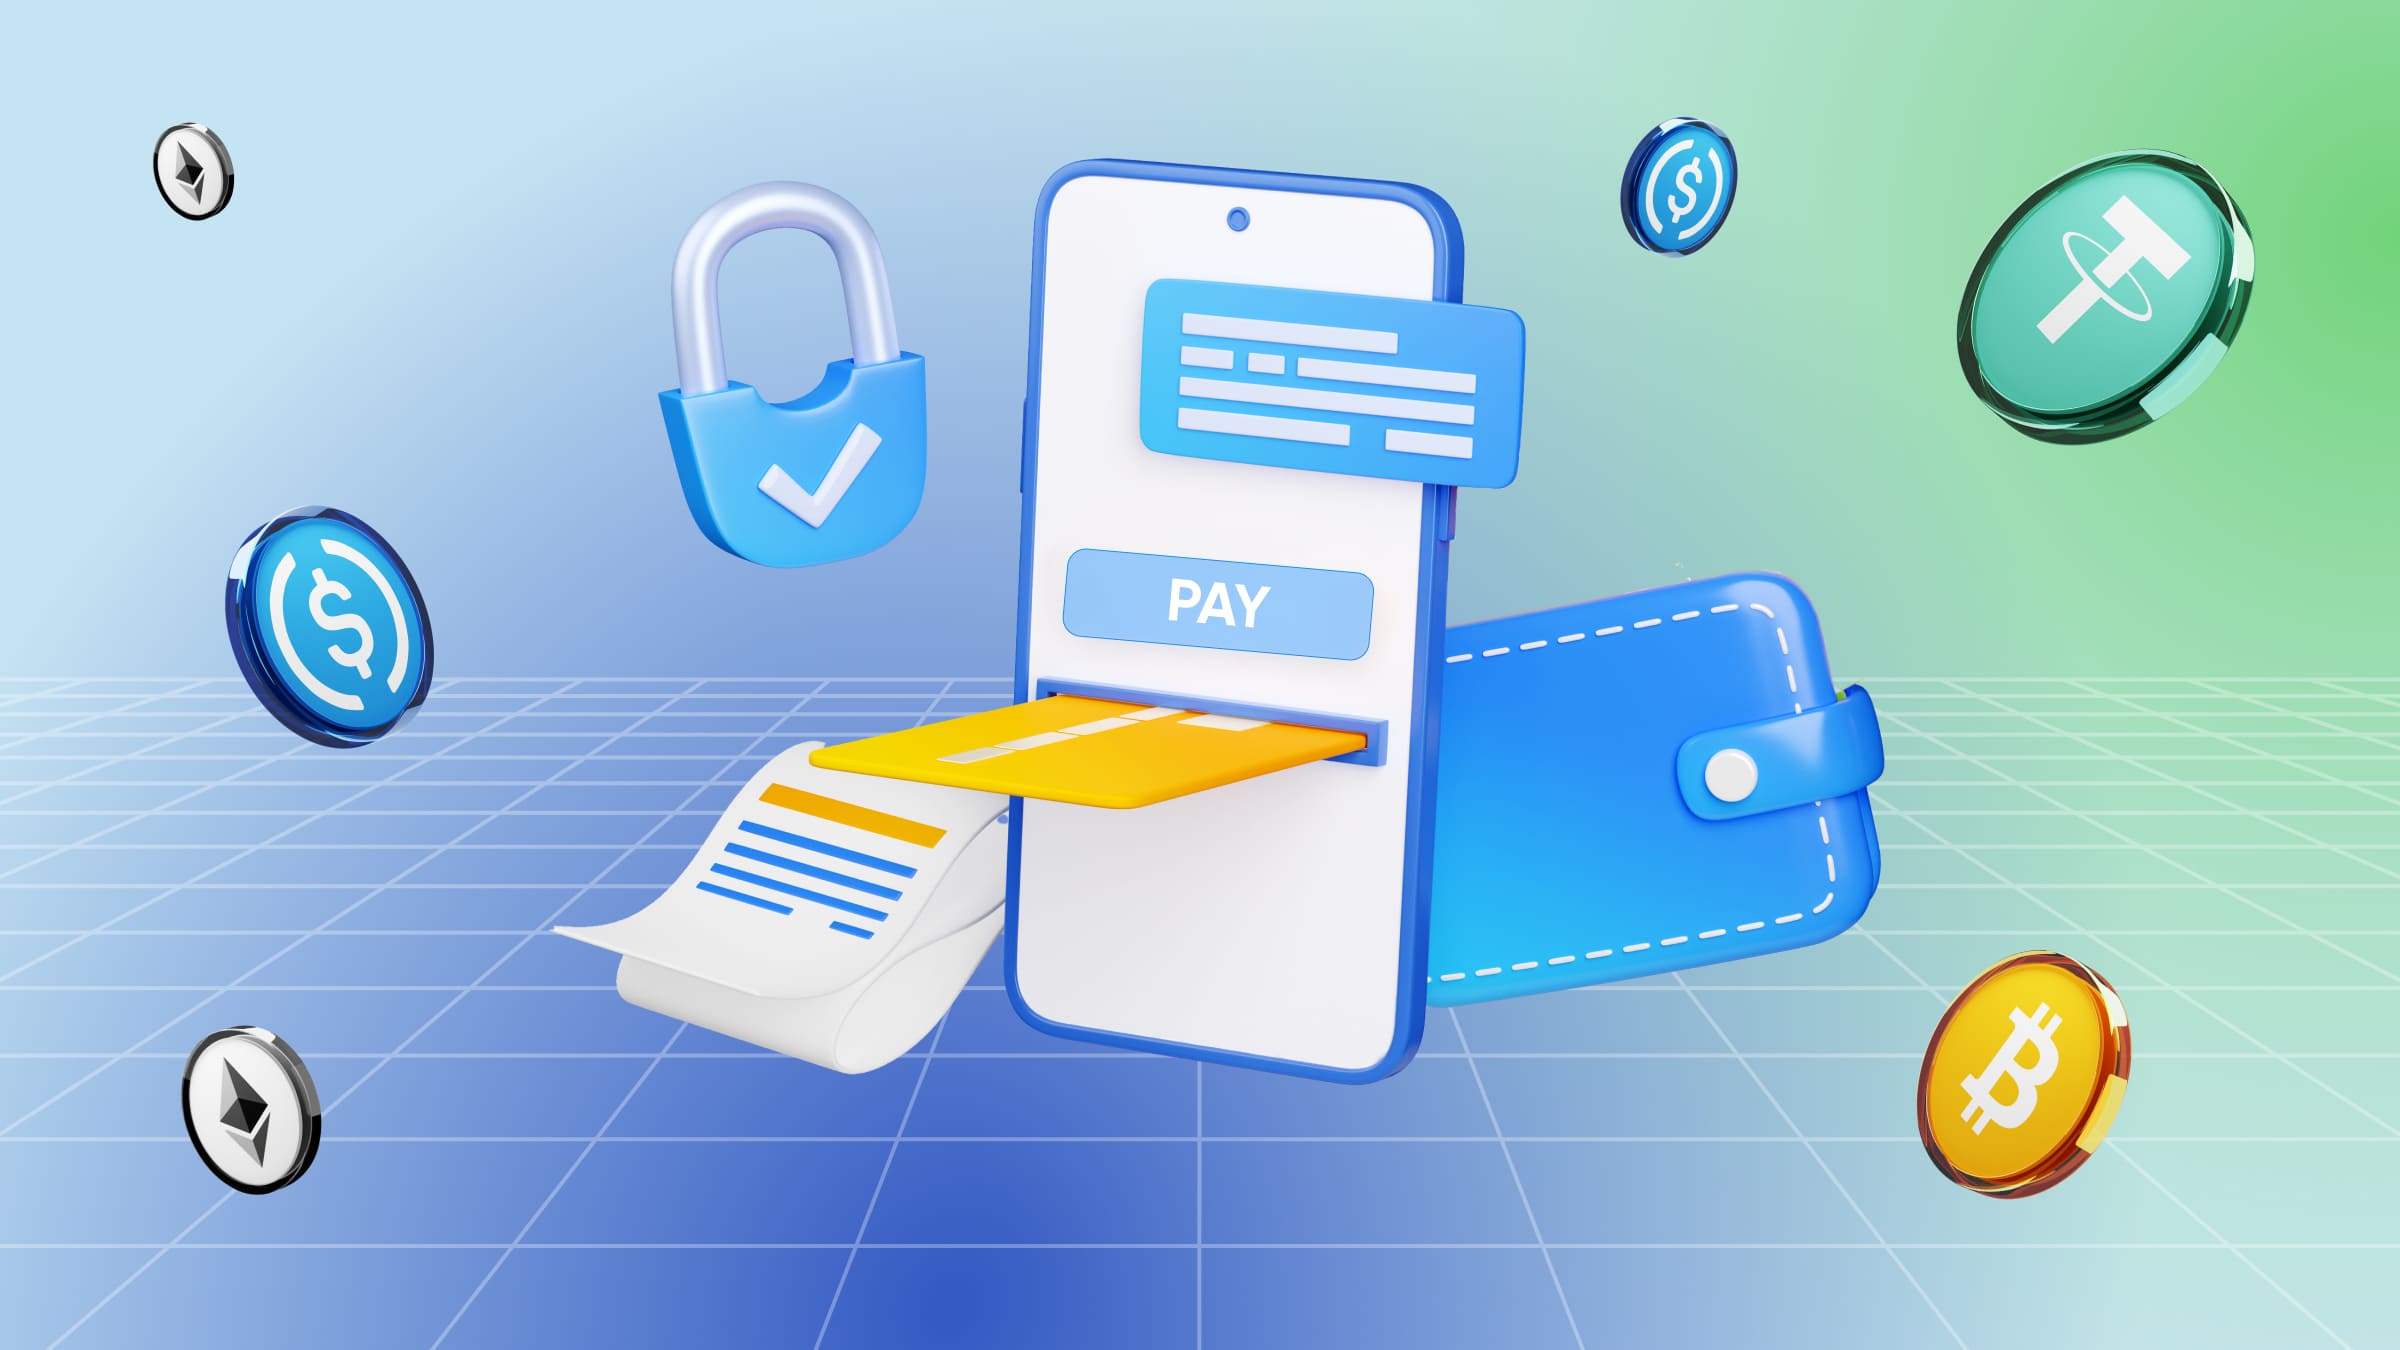 In this article, we tell you how to accept cryptocurrency payments via a mobile app.